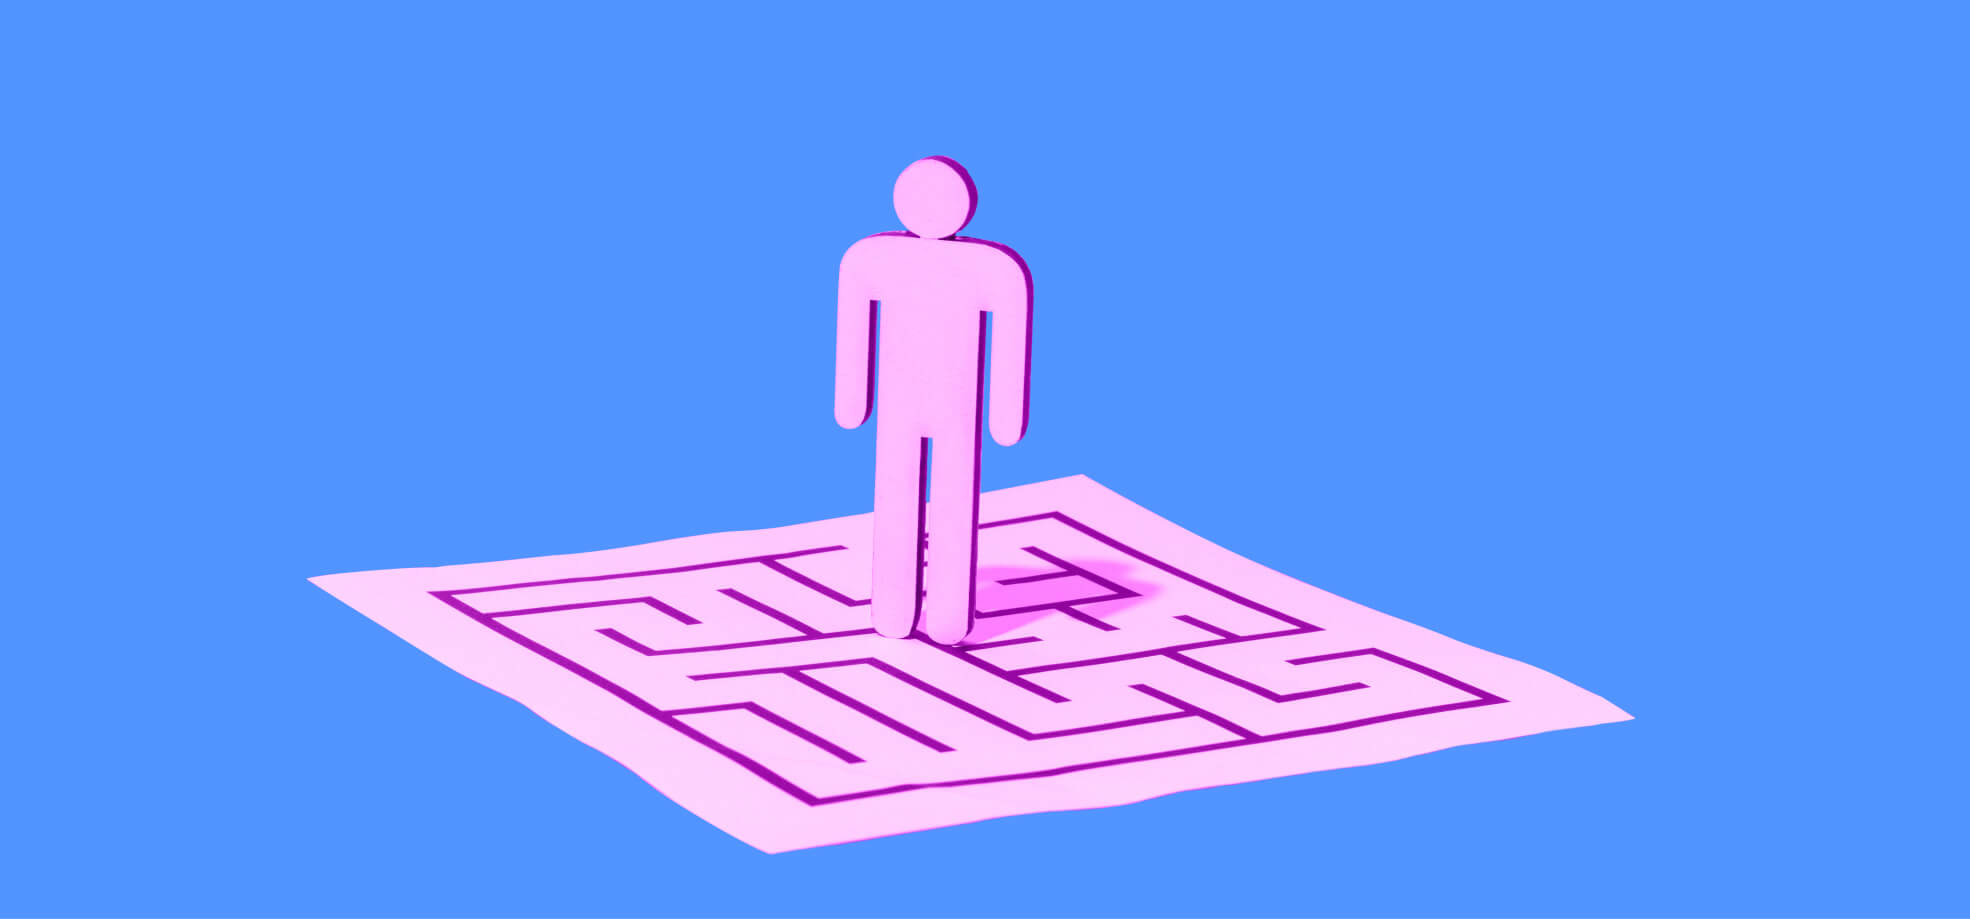 a human figure stands on a sheet of paper with a drawn labyrinth